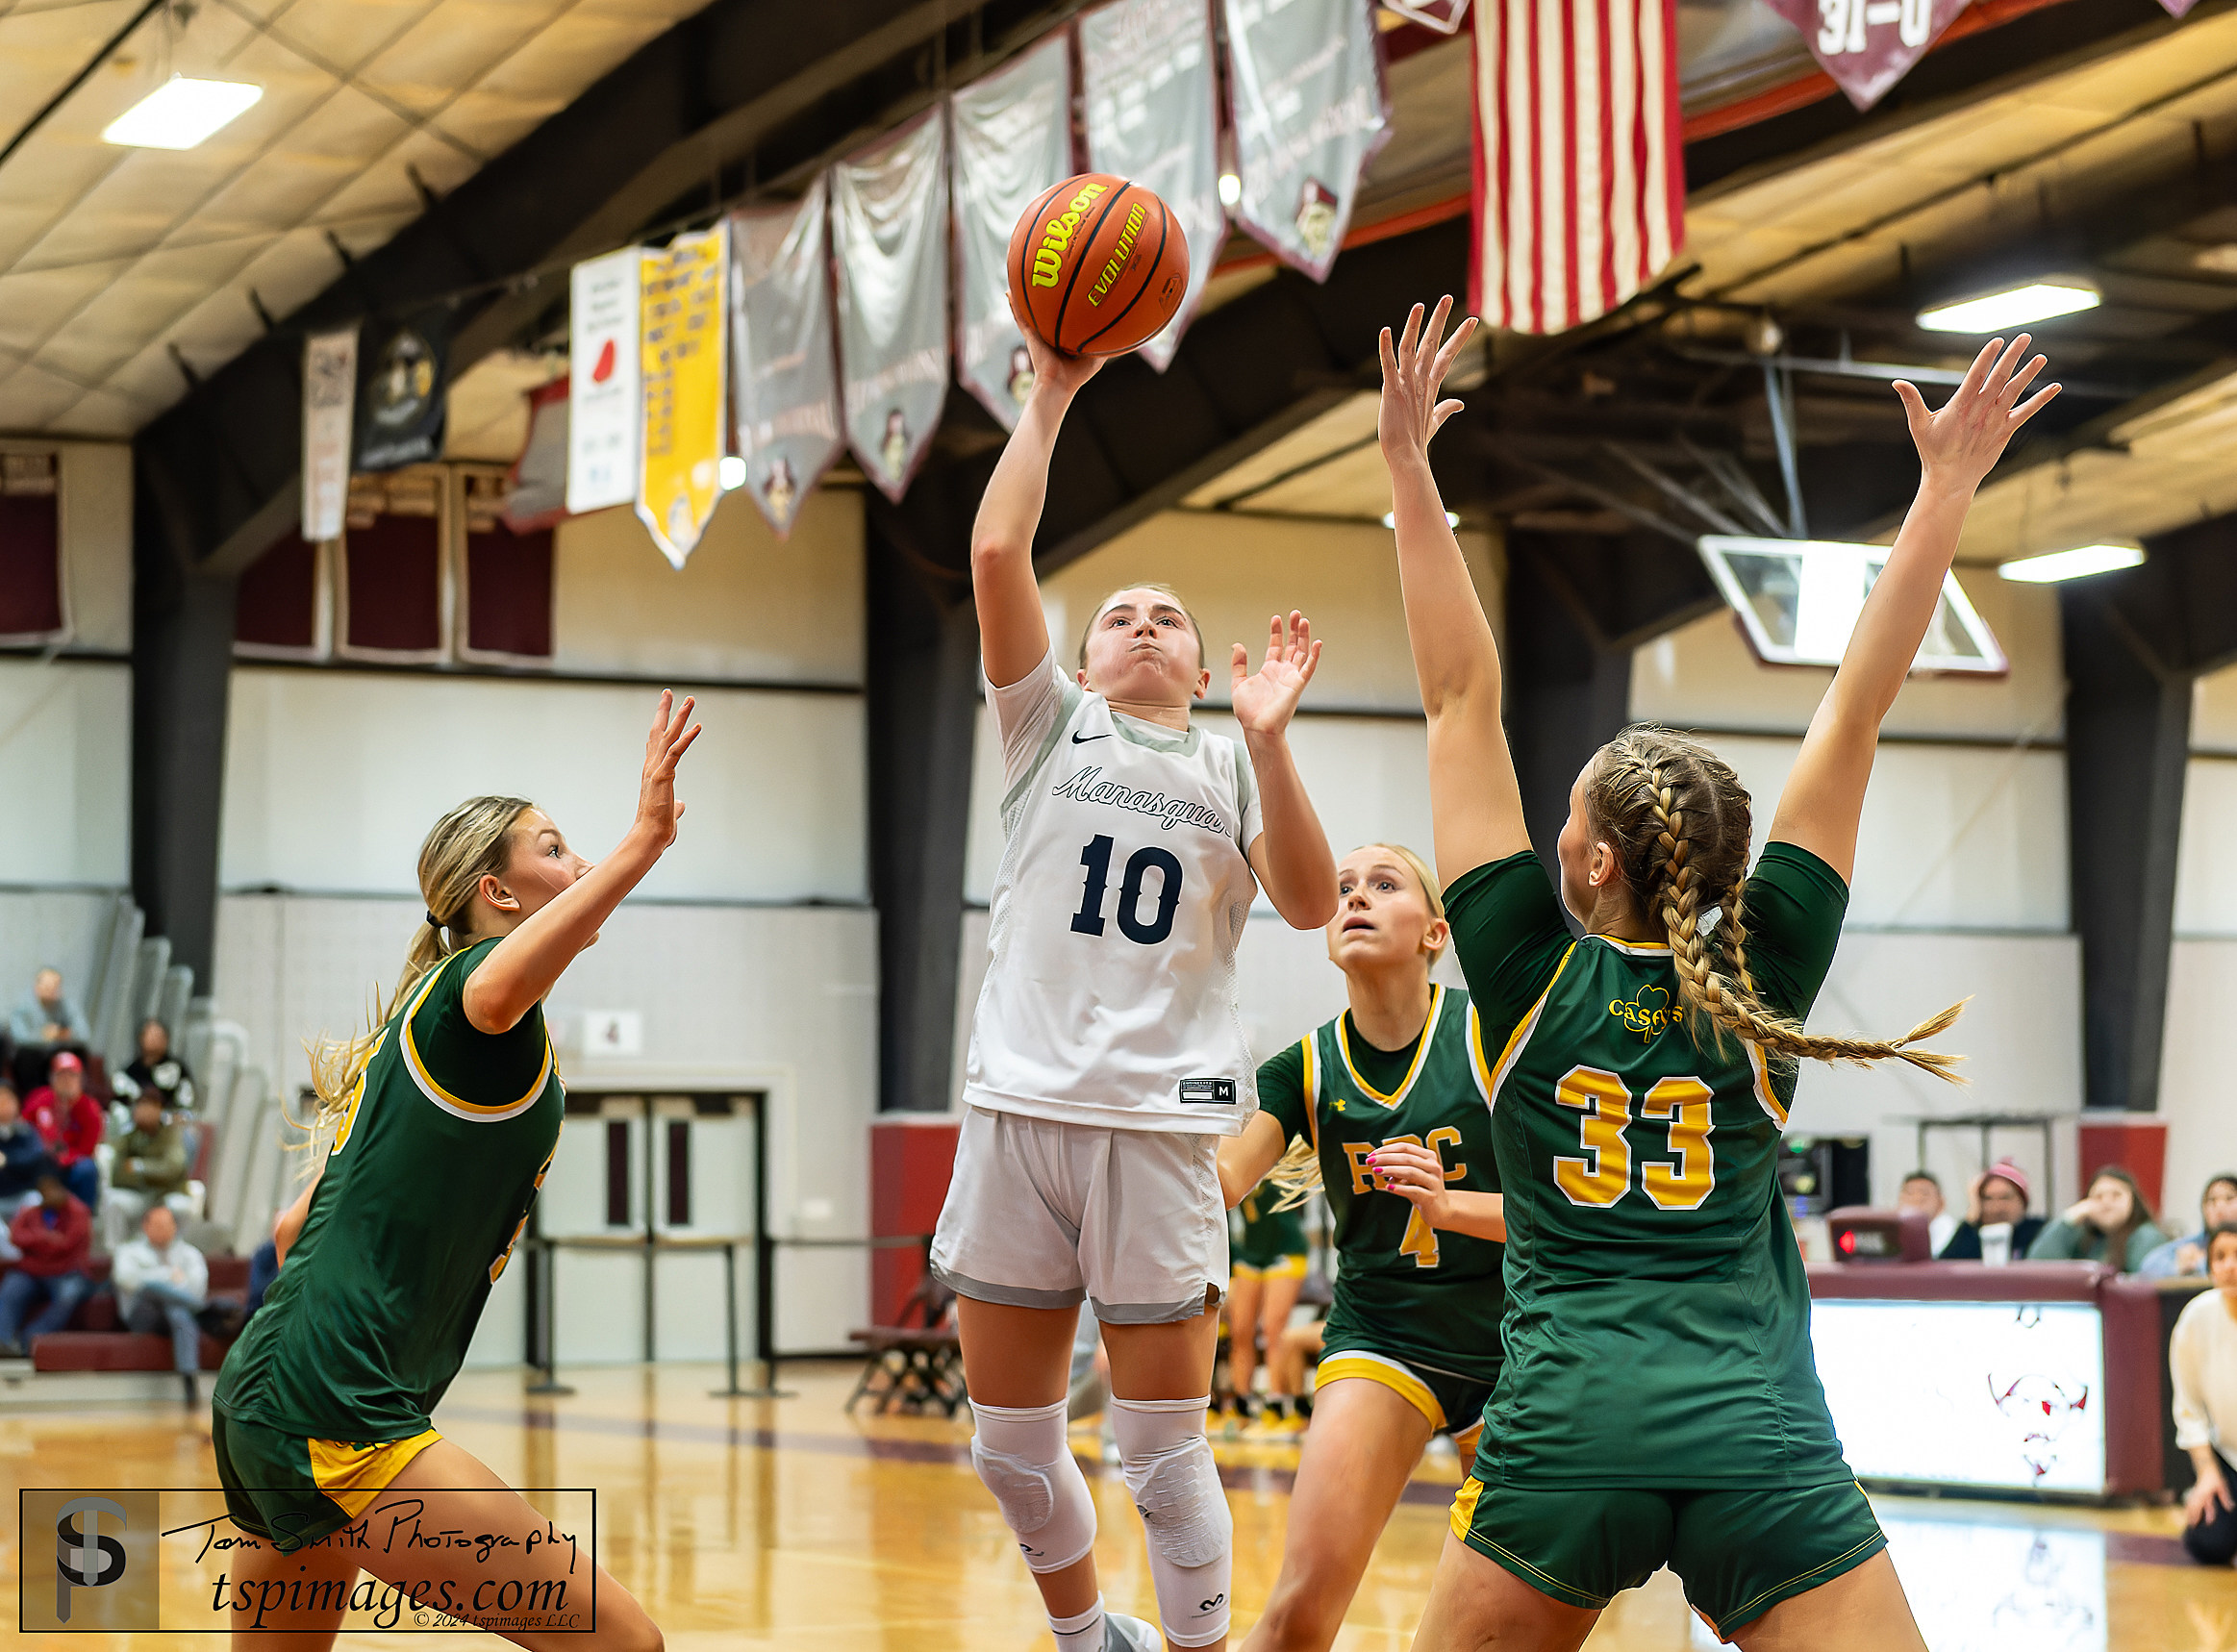 Manasquan junior Olivia Shaughnessy puts up the shot that gave her team the lead for good vs. Red Bank Catholic in the Shore Conference Tournament semifinals. (Photo: Tom Smith | tspsportsimages.com)